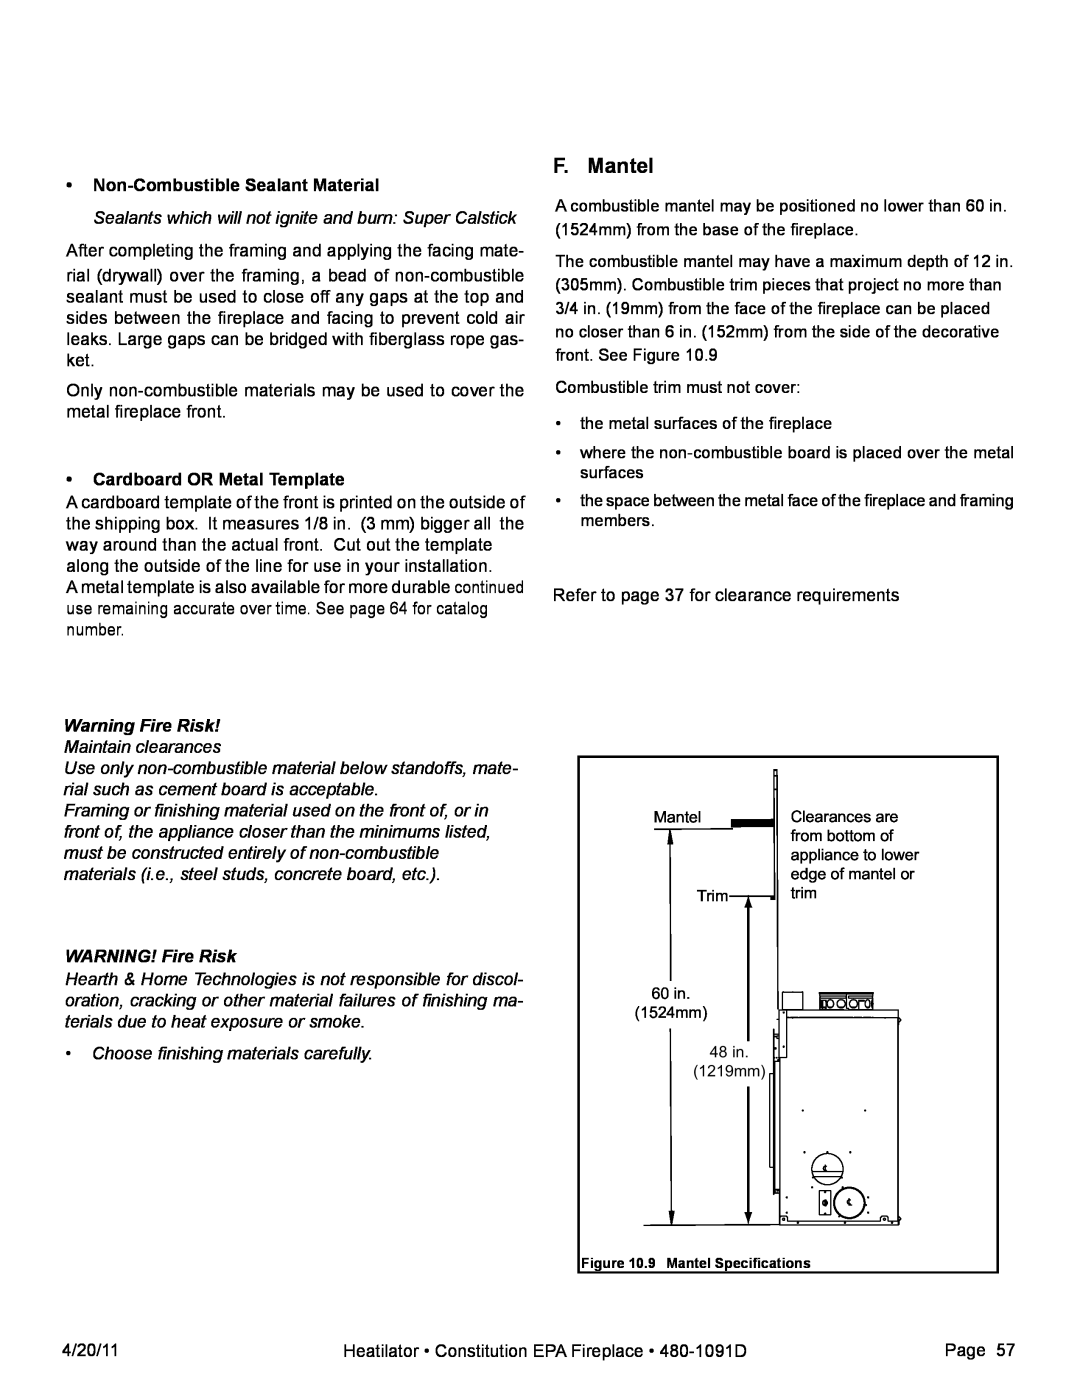 Heatiator C40 owner manual F. Mantel, •Non-CombustibleSealant Material, •Cardboard OR Metal Template, Warning Fire Risk 